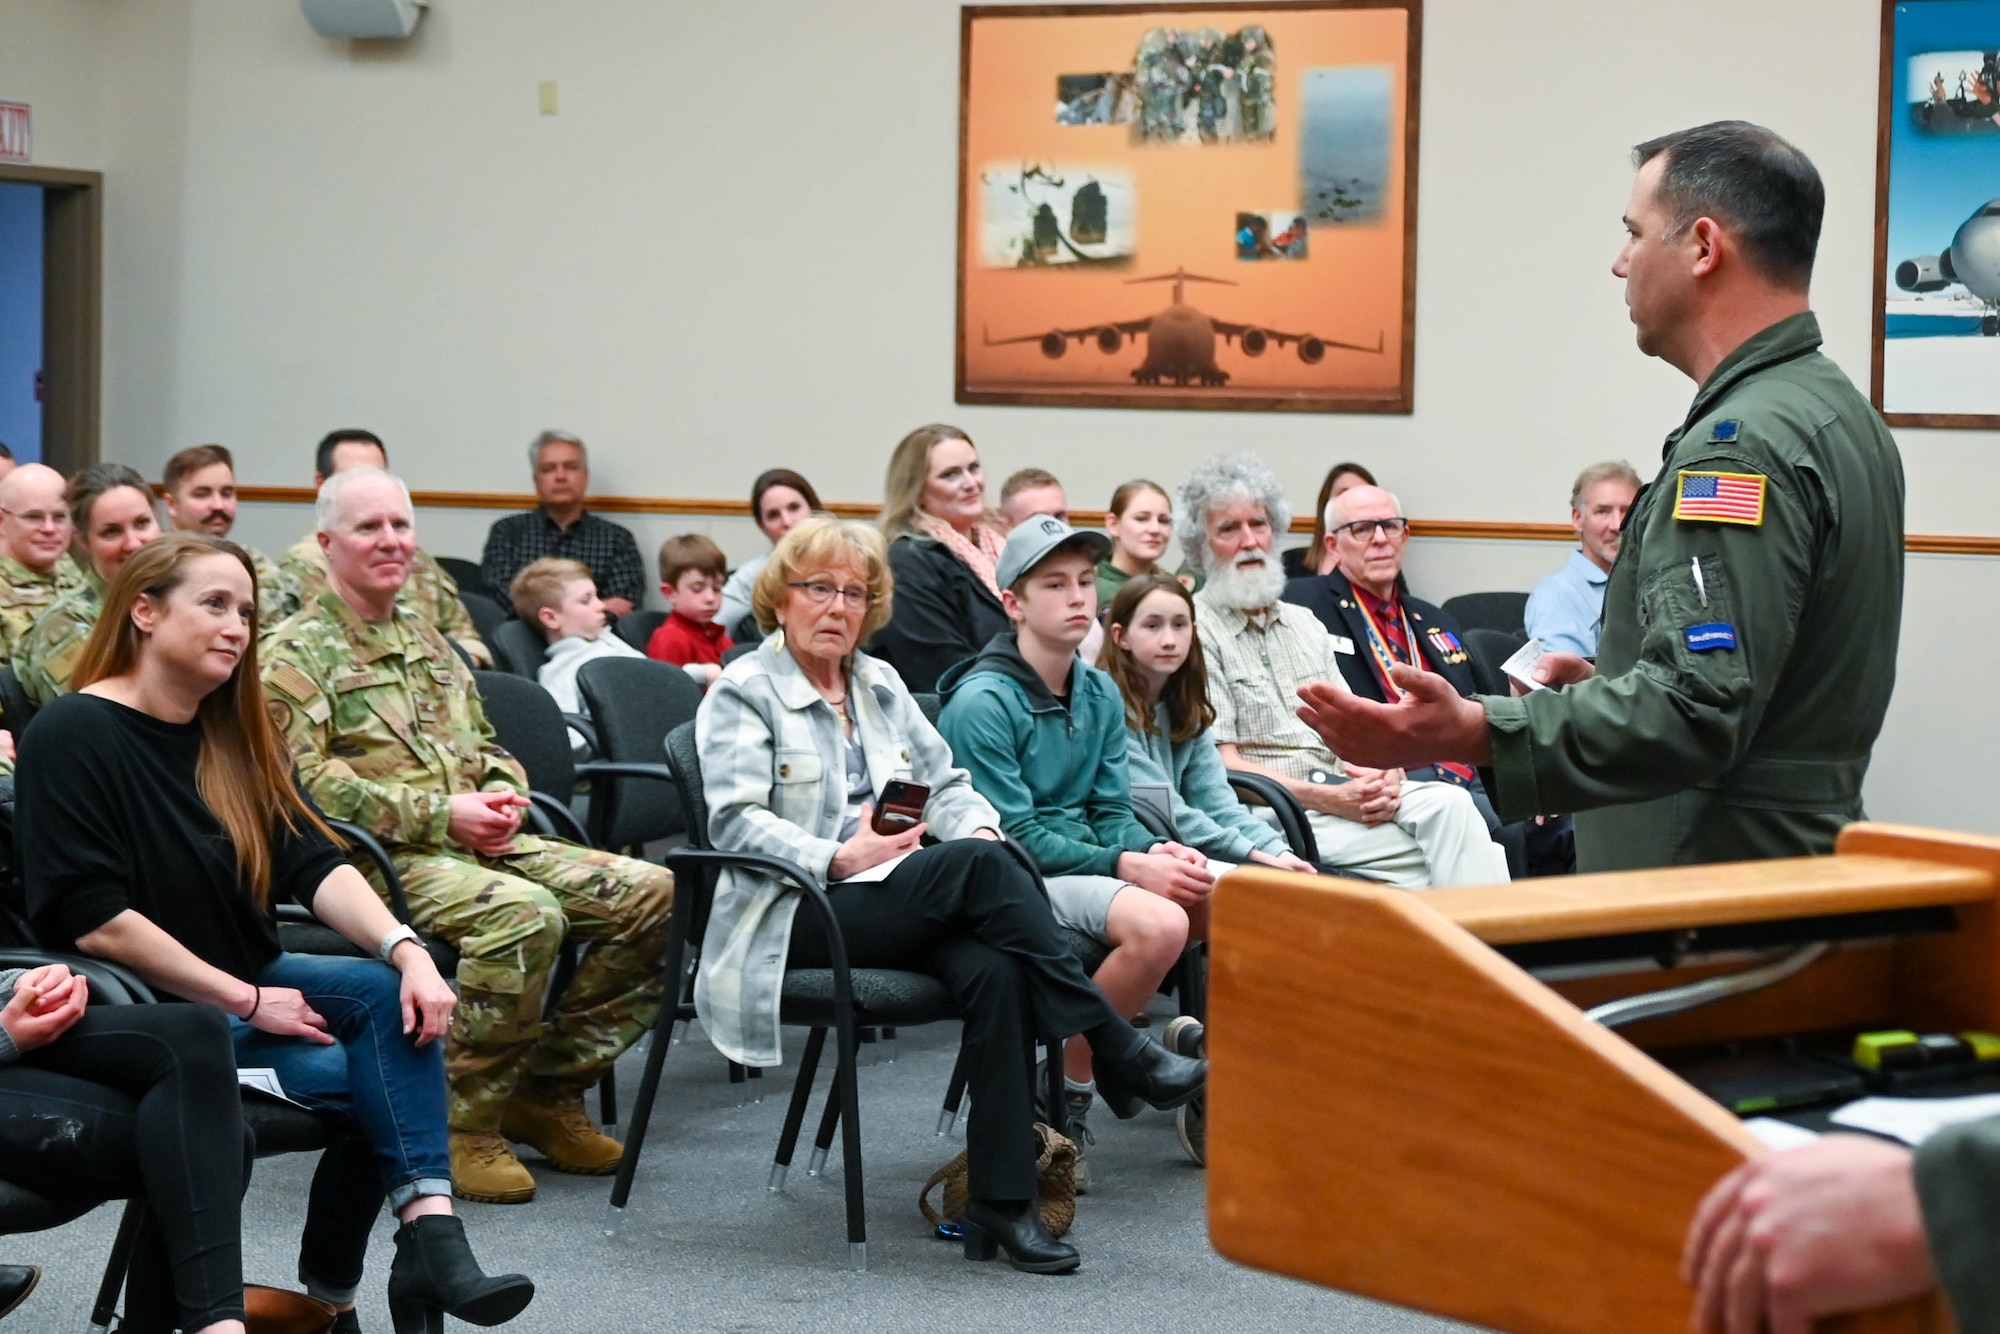 A man wearing a green flight suit gives a speech to a mixed civilian and military audience.